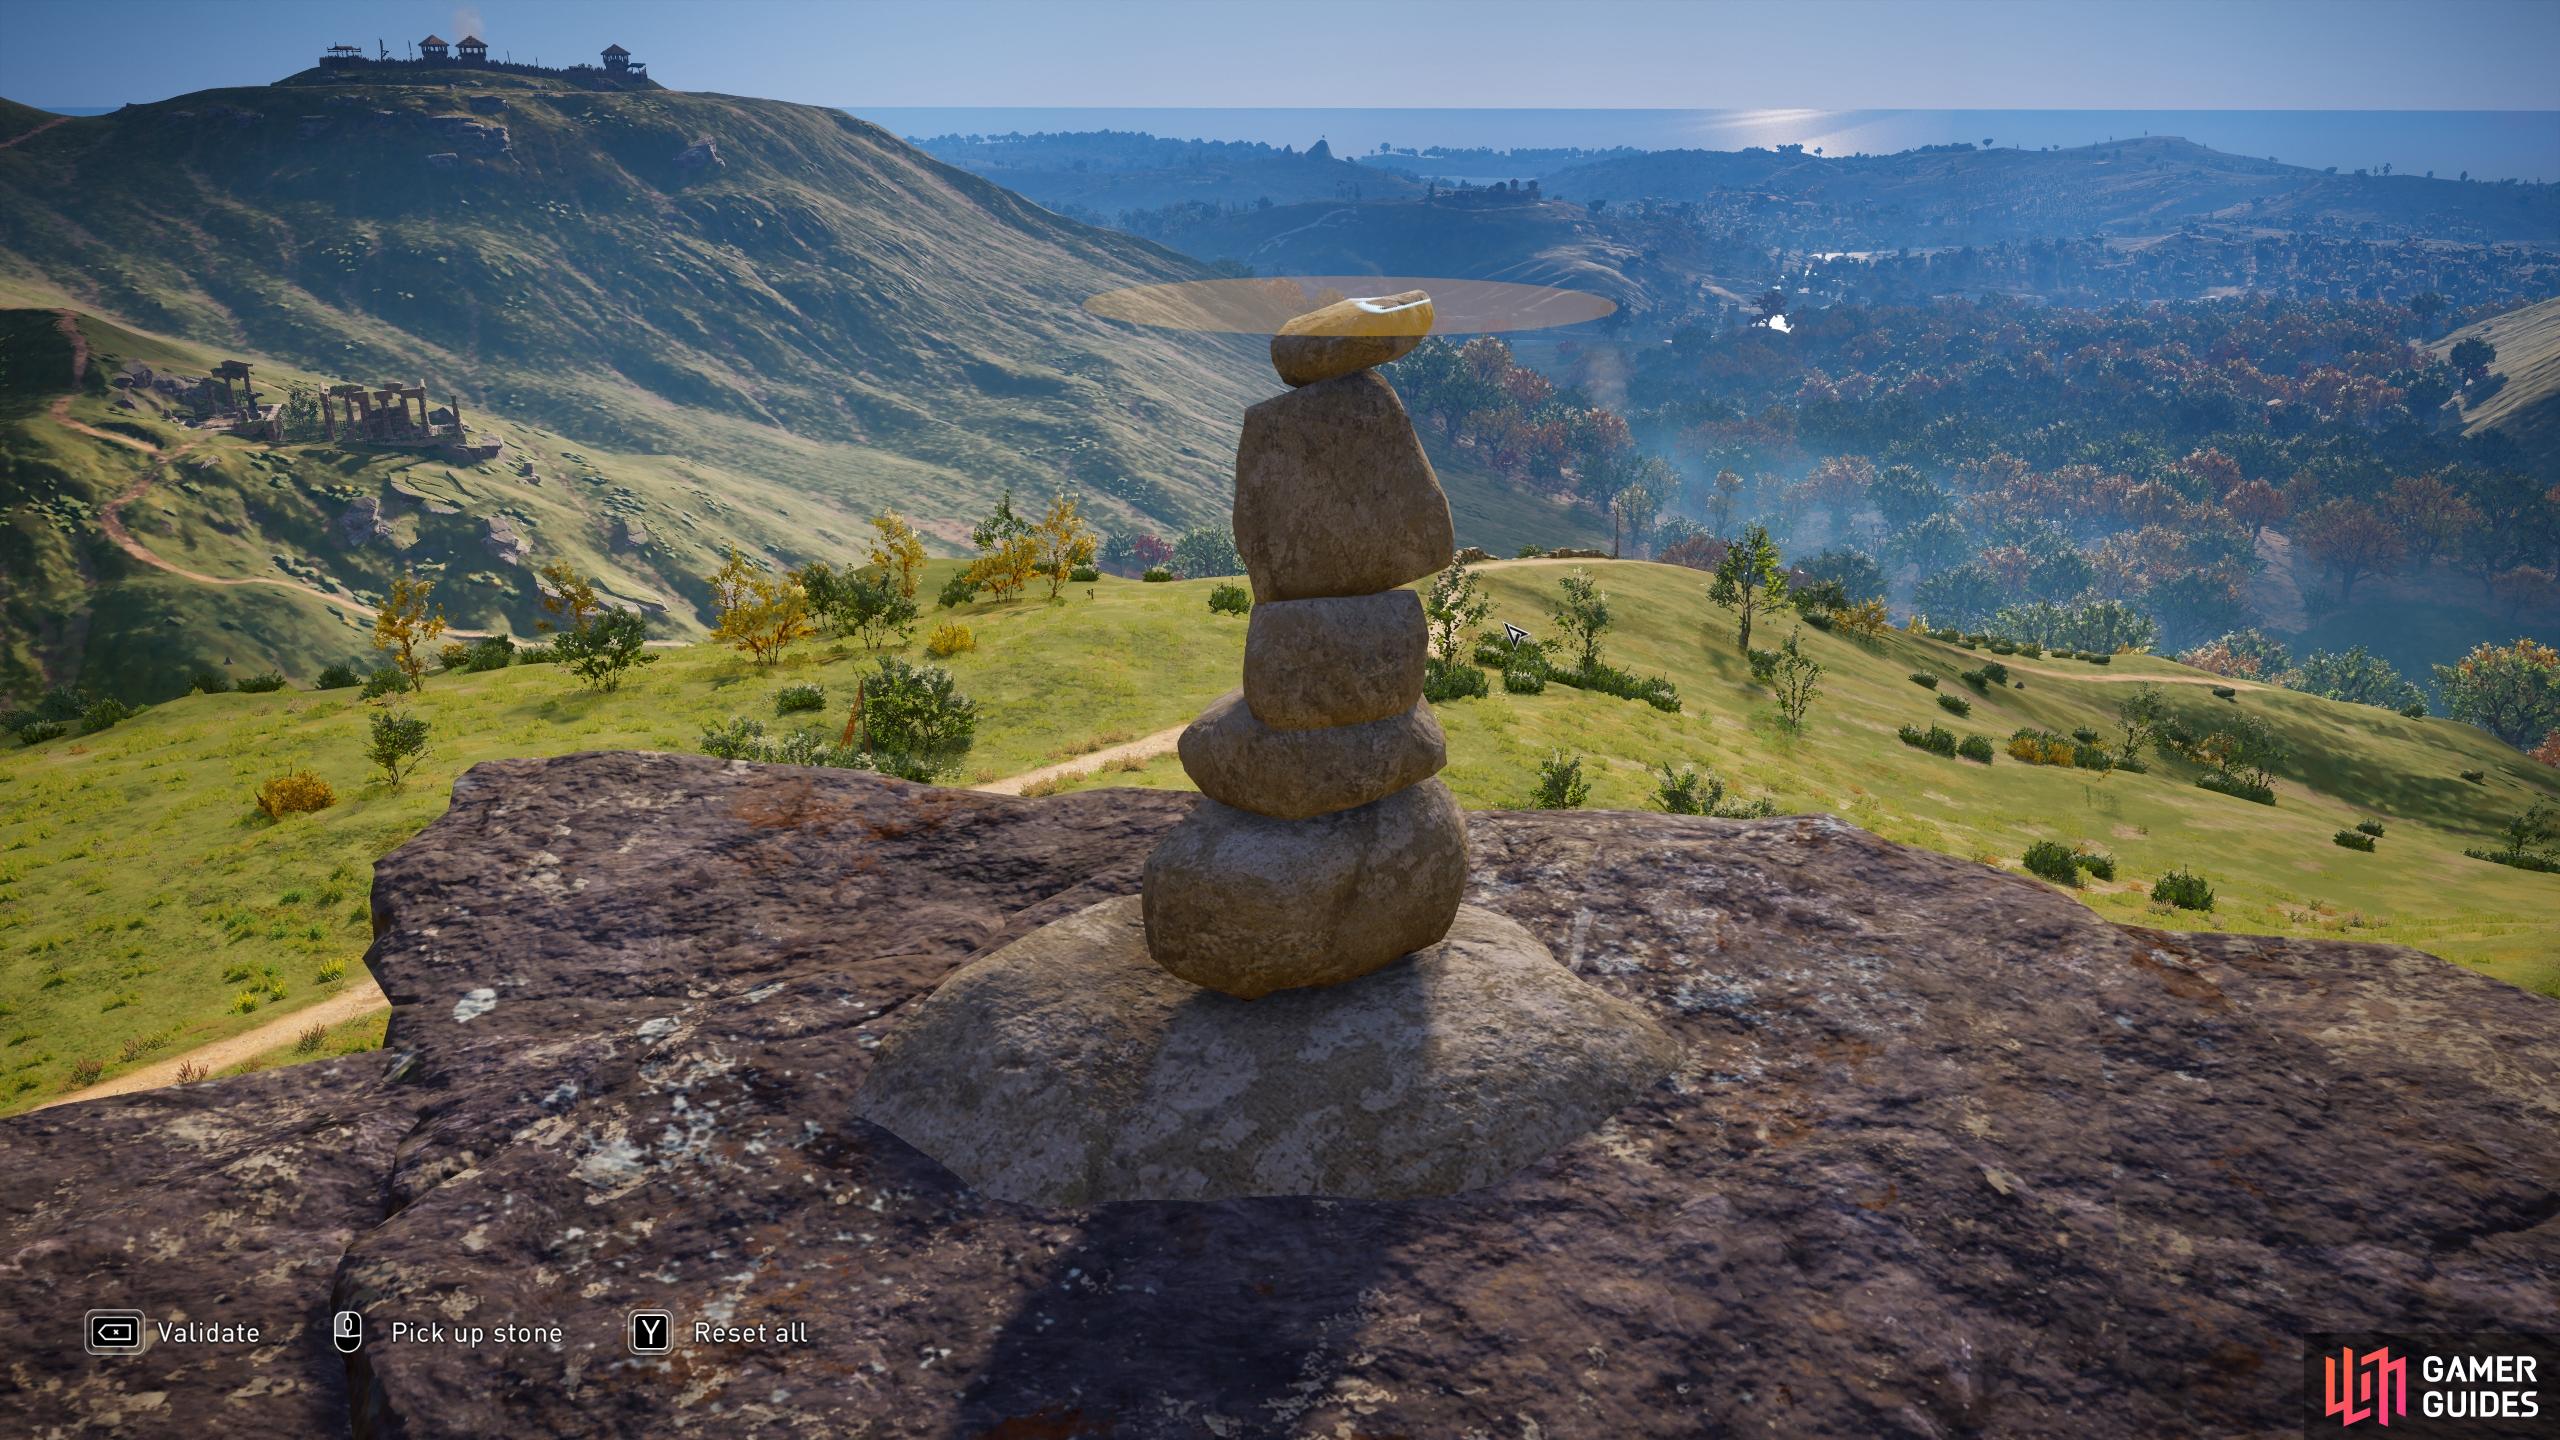 You'll need to stack the stones to the required height threshold before you can validate them.